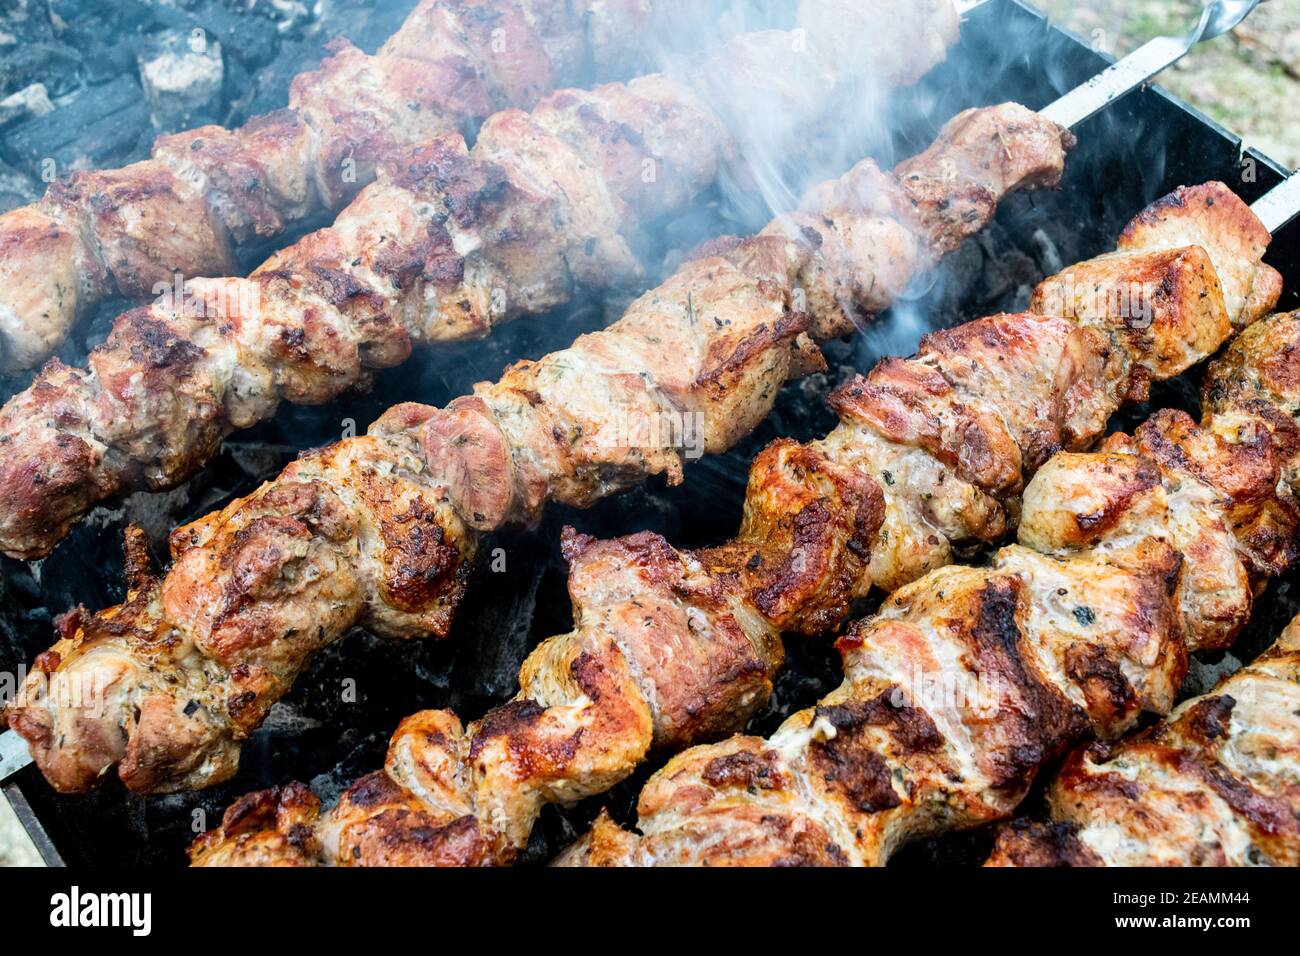 Frying pork on a skewer over a brazier. Turning meat over coals. Appetizing shish kebab. Stock Photo